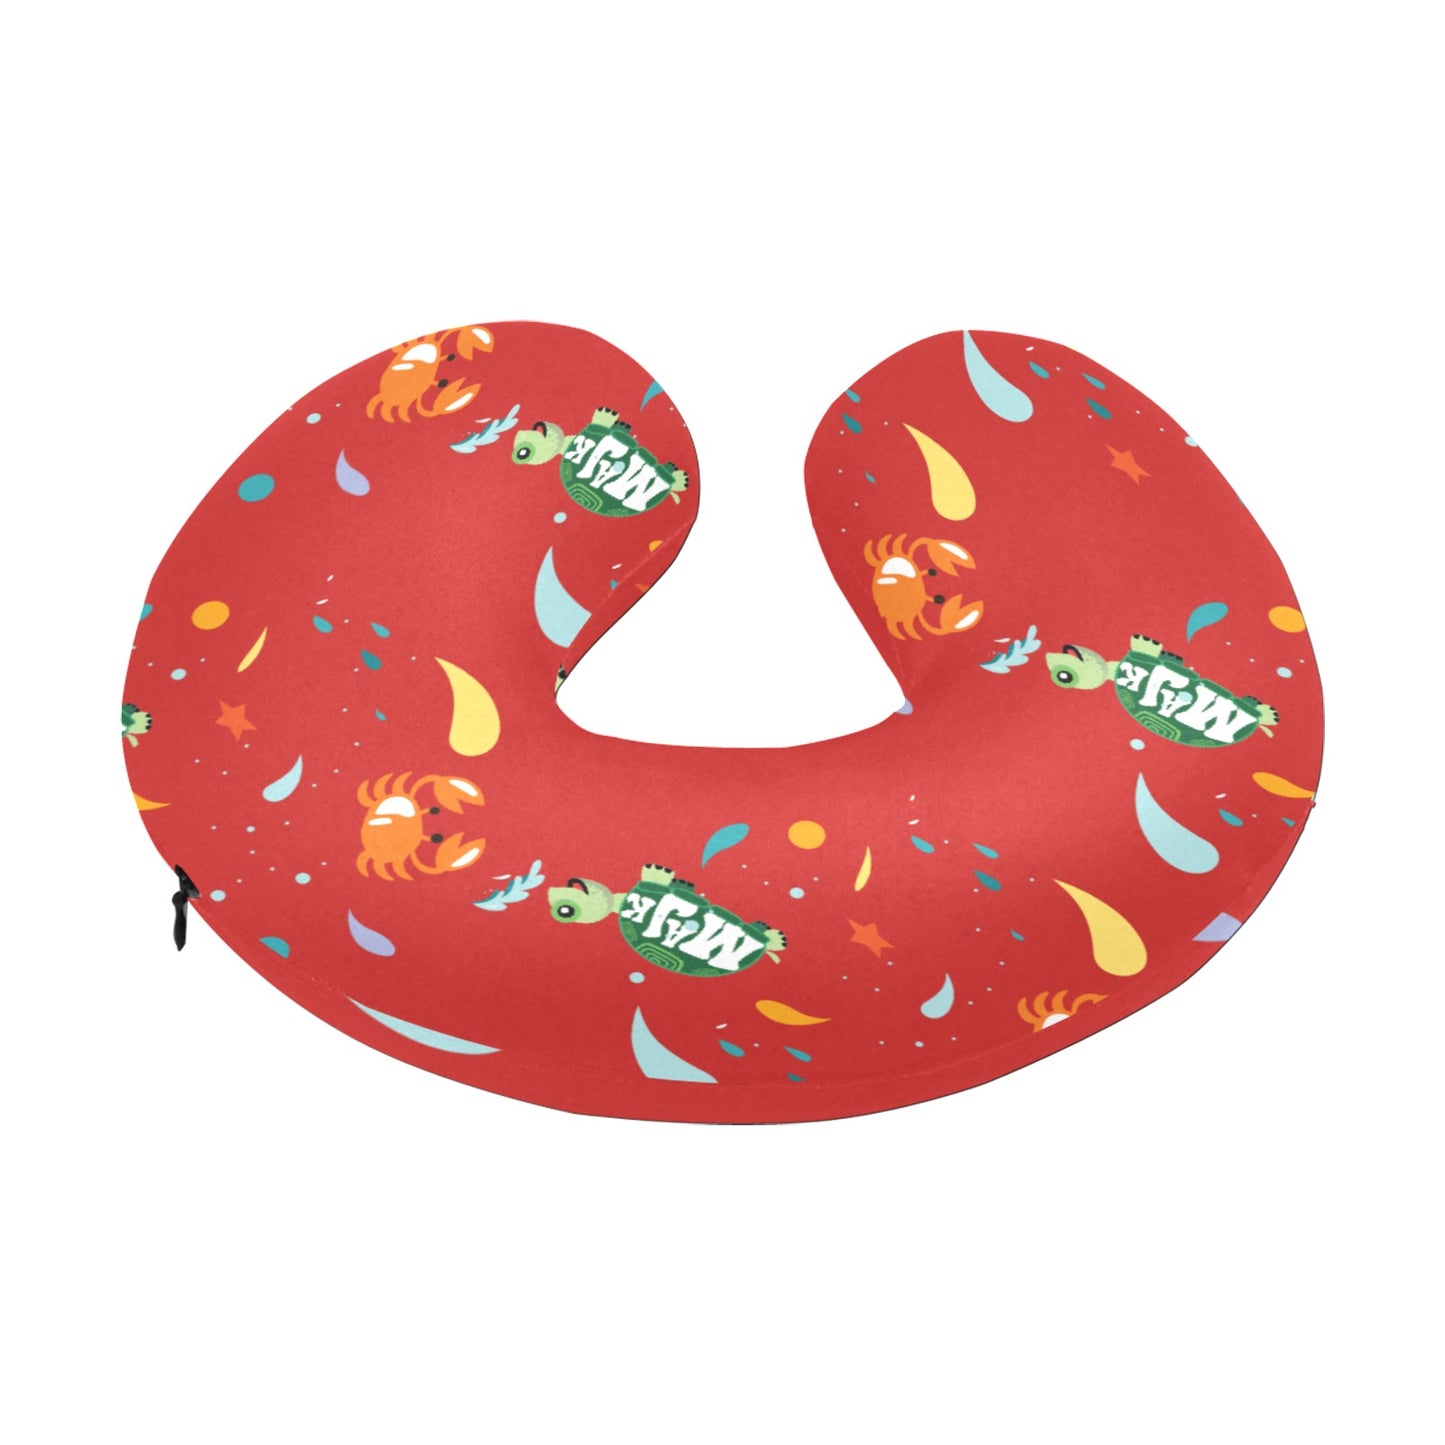 U-Shaped Travel Neck Pillow "Surfs Up" pattern (Red)